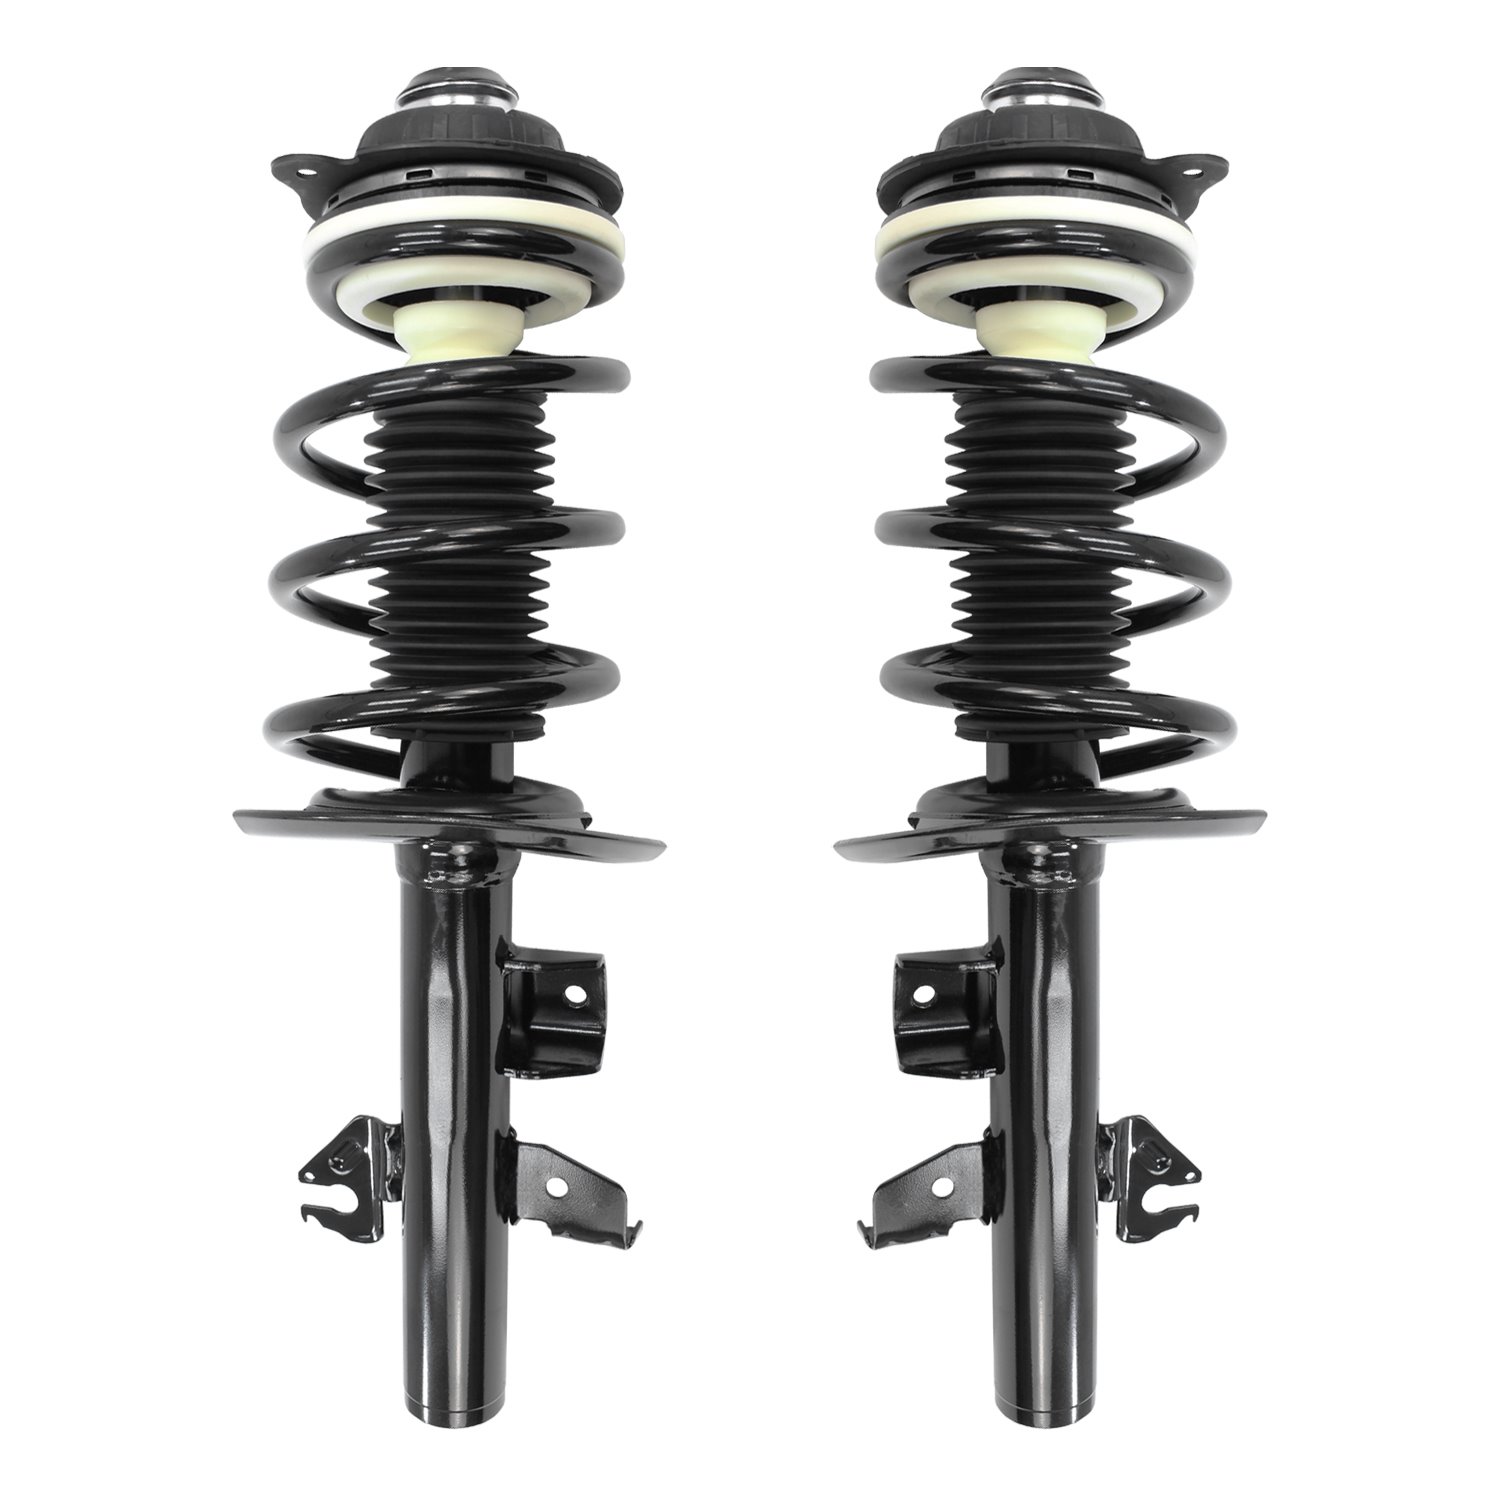 2-13613-13614-001 Front Suspension Strut & Coil Spring Assemby Set Fits Select Jeep Cherokee